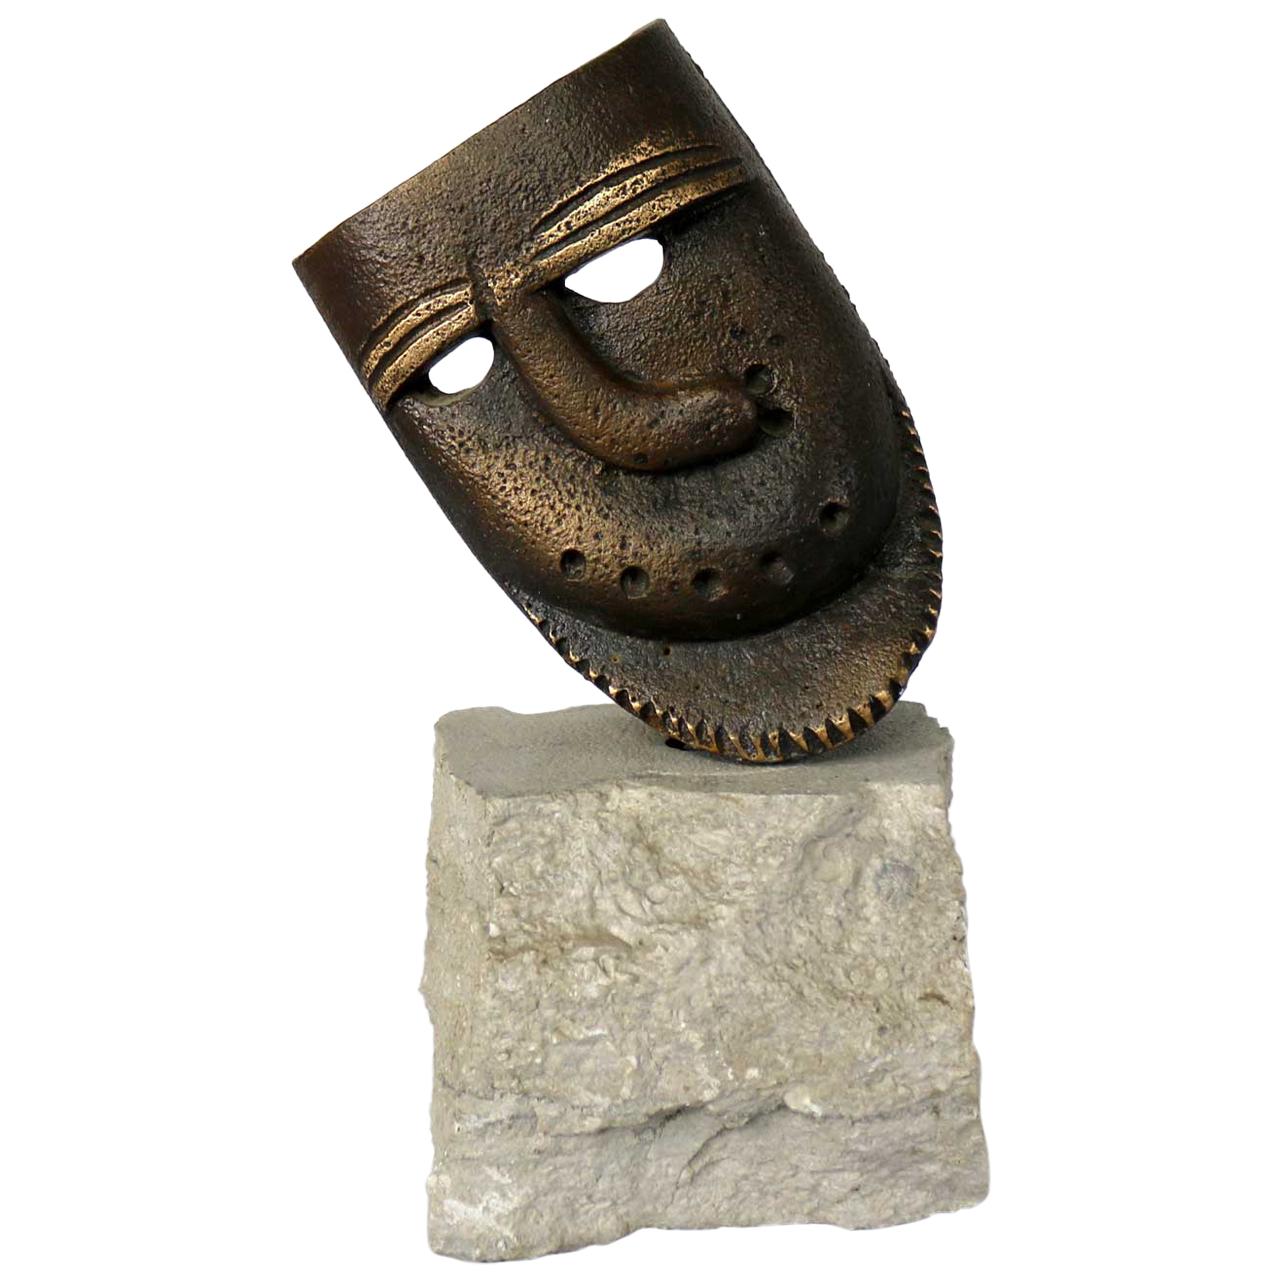 Cast Bronze African Mask Sculpture with Crooked Nose Mounted on Limestone Stand